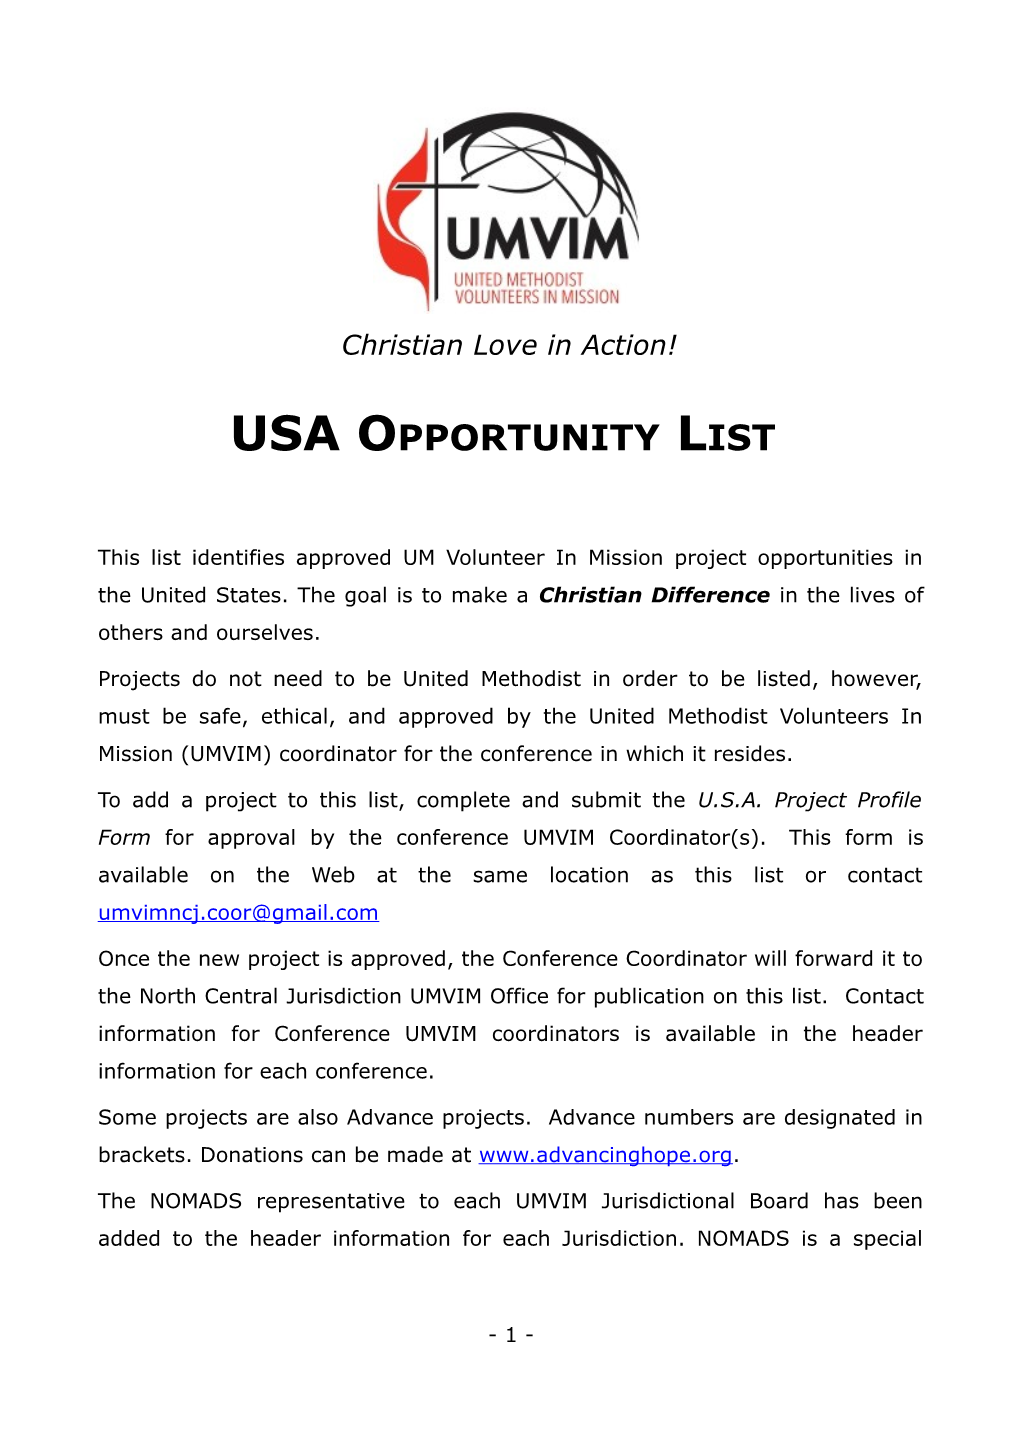 USA Opportunity List